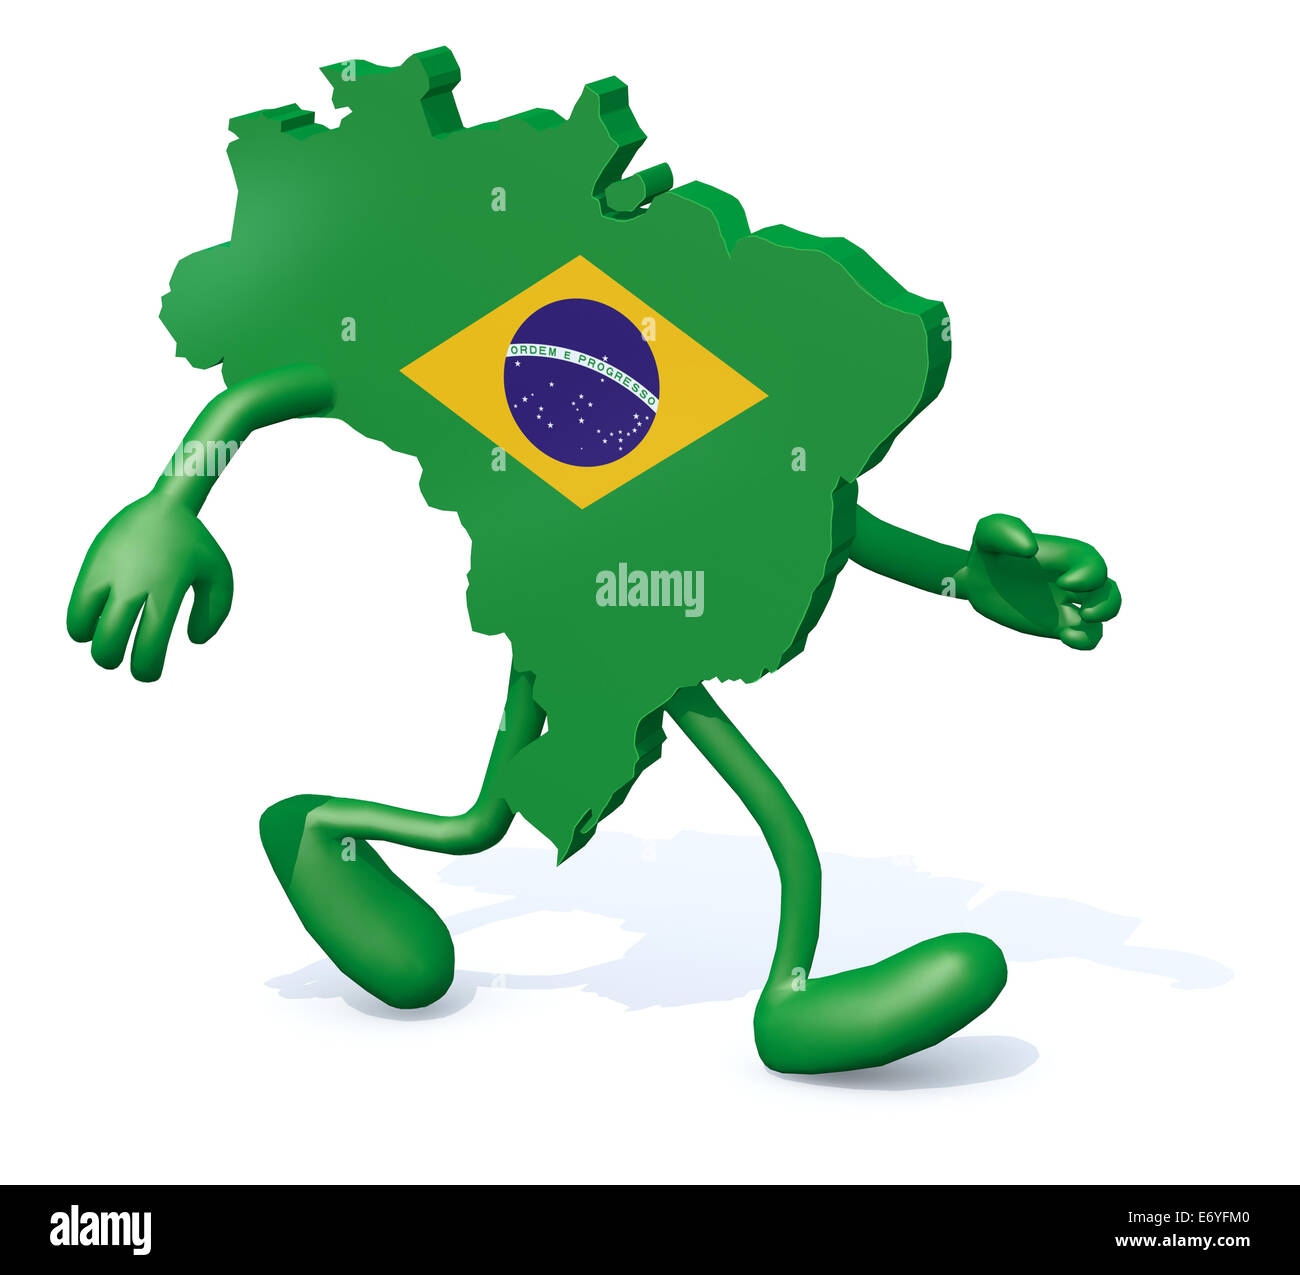 brasilian map with arms and legs walking, 3d illustration Stock Photo